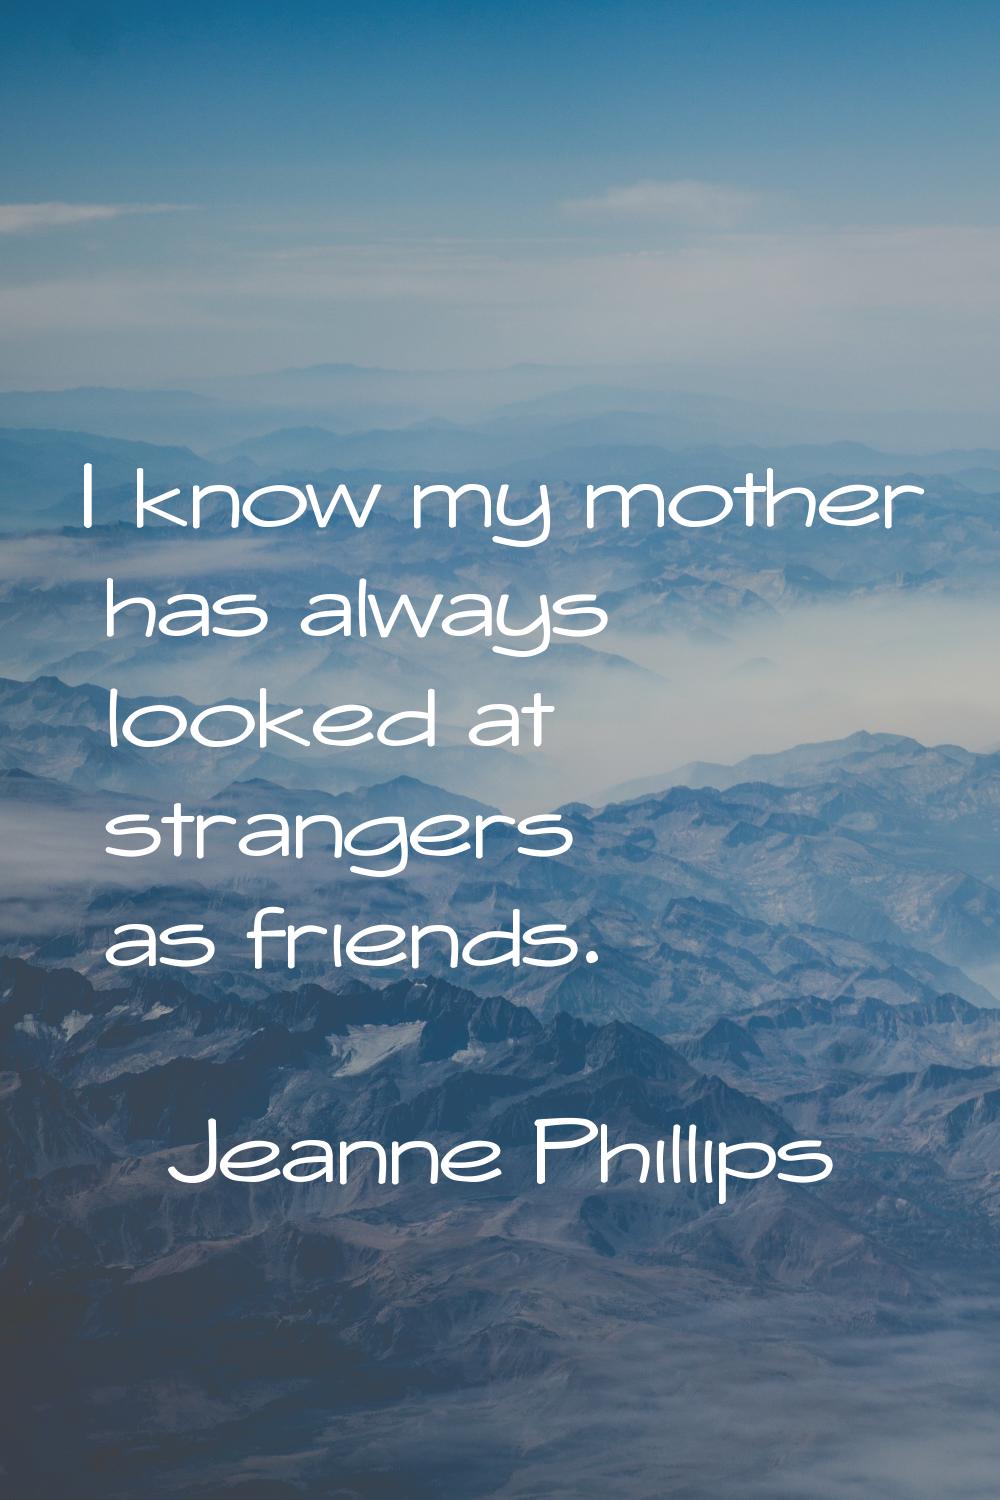 I know my mother has always looked at strangers as friends.